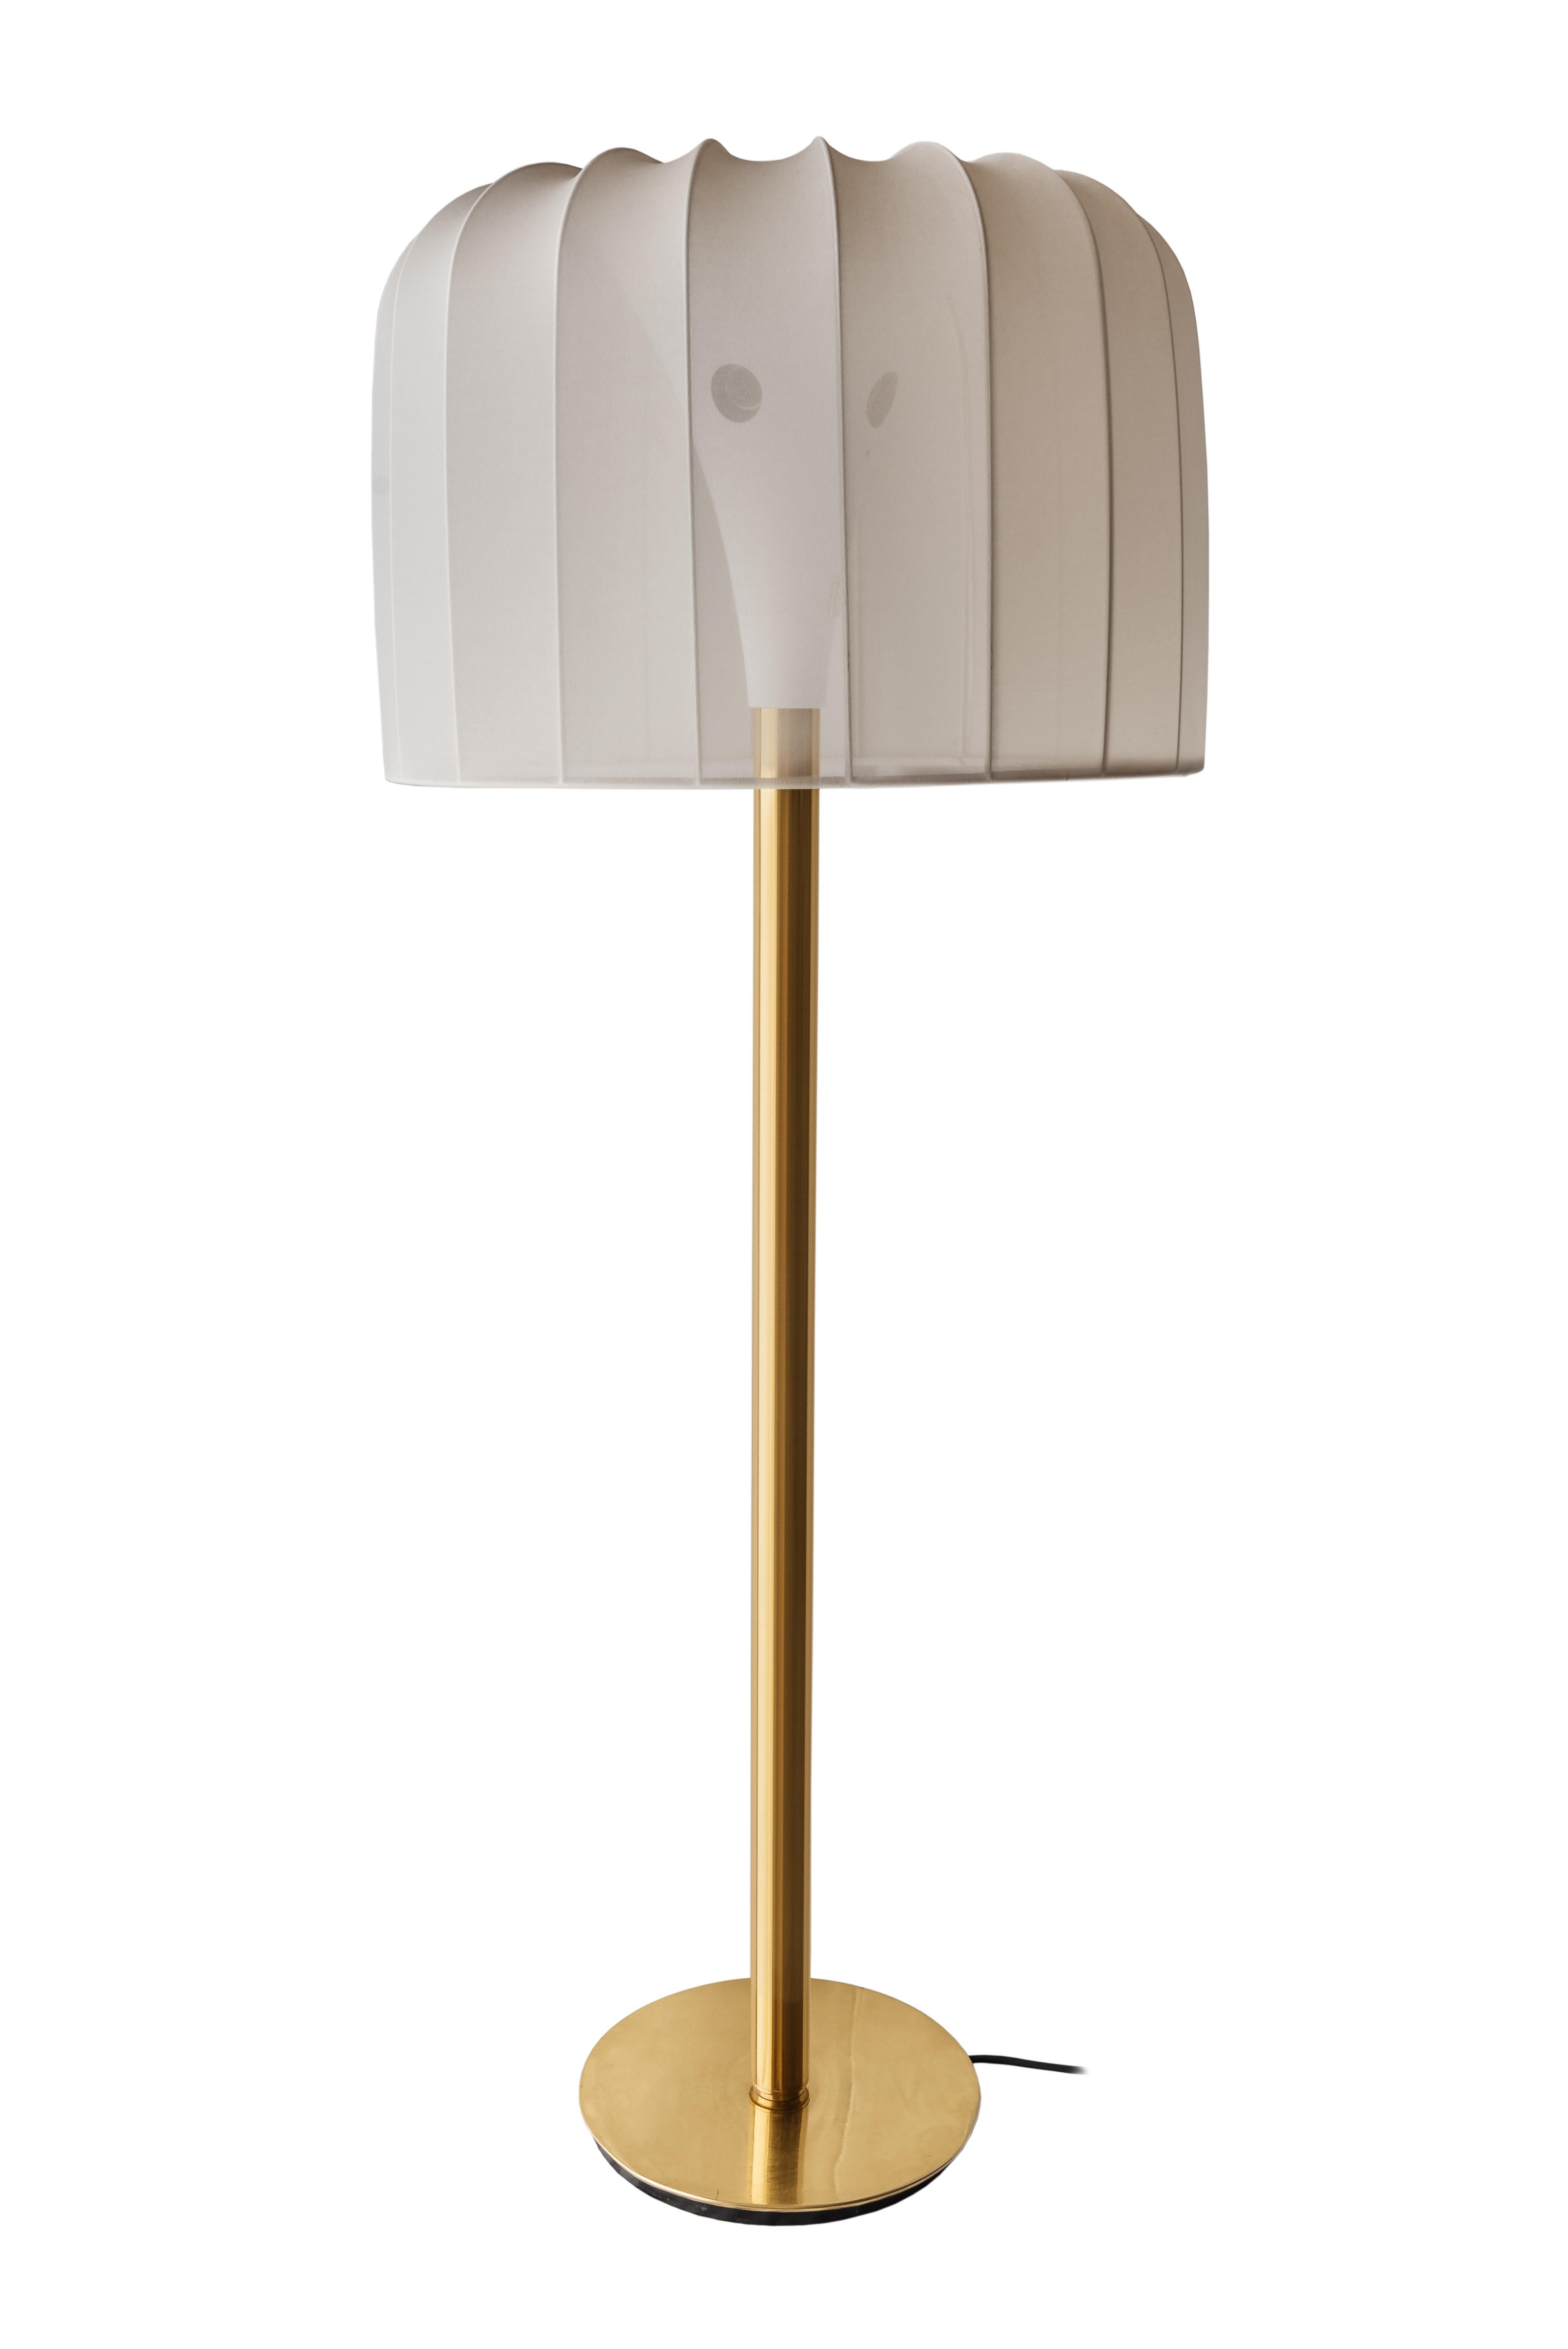 Mid-Century Modern white and brass uplighter by Staff Leuchten, Germany, 1960s.
A rare large floor lamp with a brass stem with cream ruched-fabric shade. Rewired. Few scuffs mark to the brass surface. Some pitting to top metal. Fabric is new.
Cast